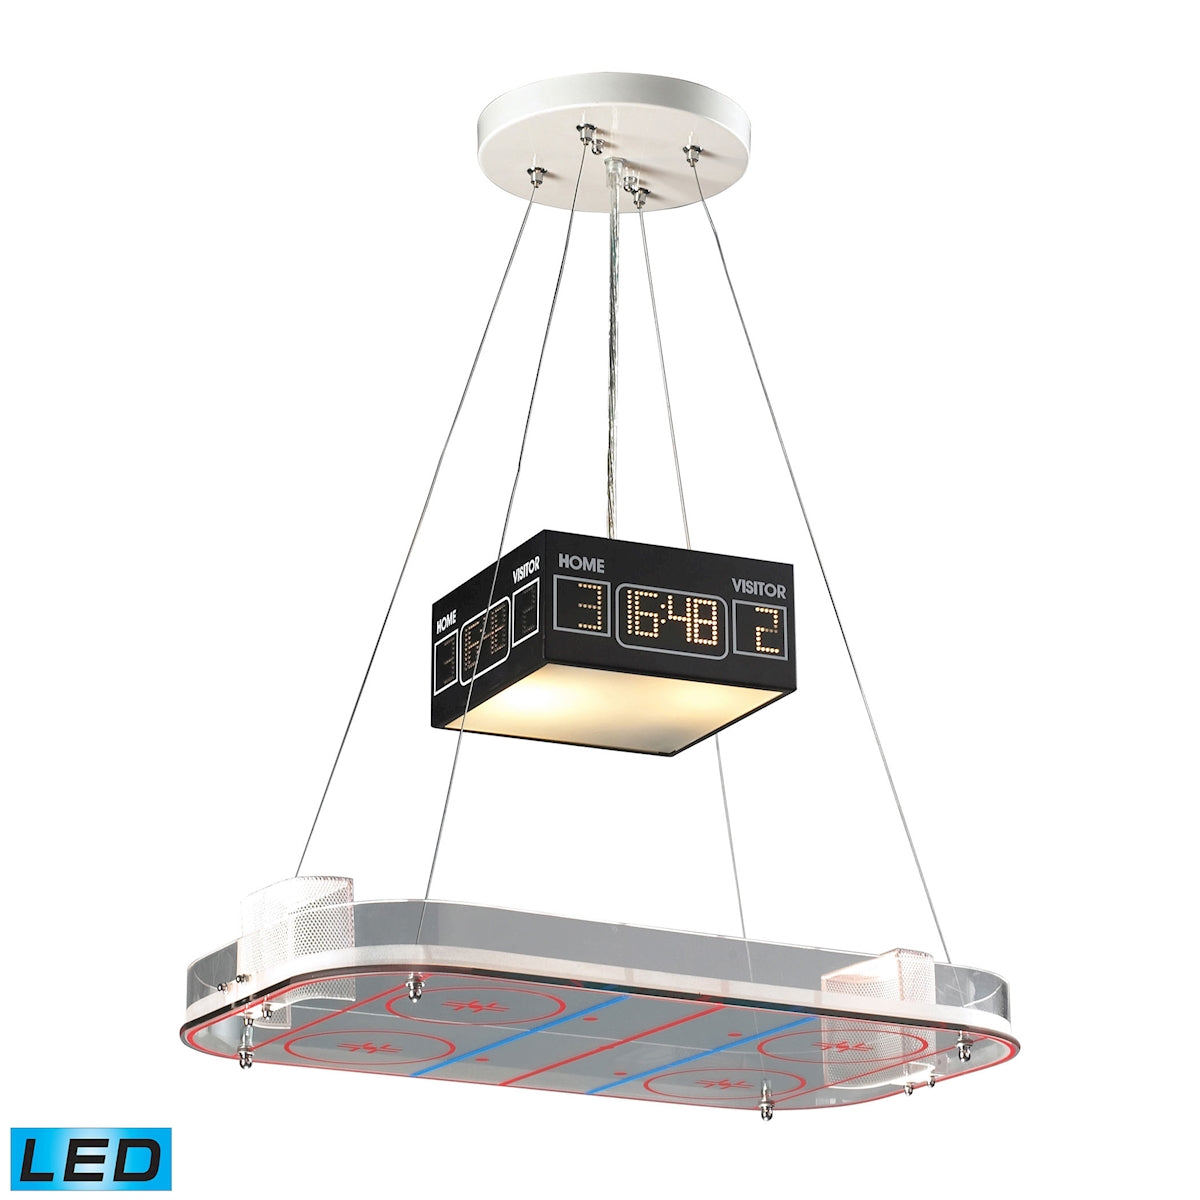 Novelty 2-Light Island Light in Silver with Hockey Arena Motif - Includes LED Bulbs